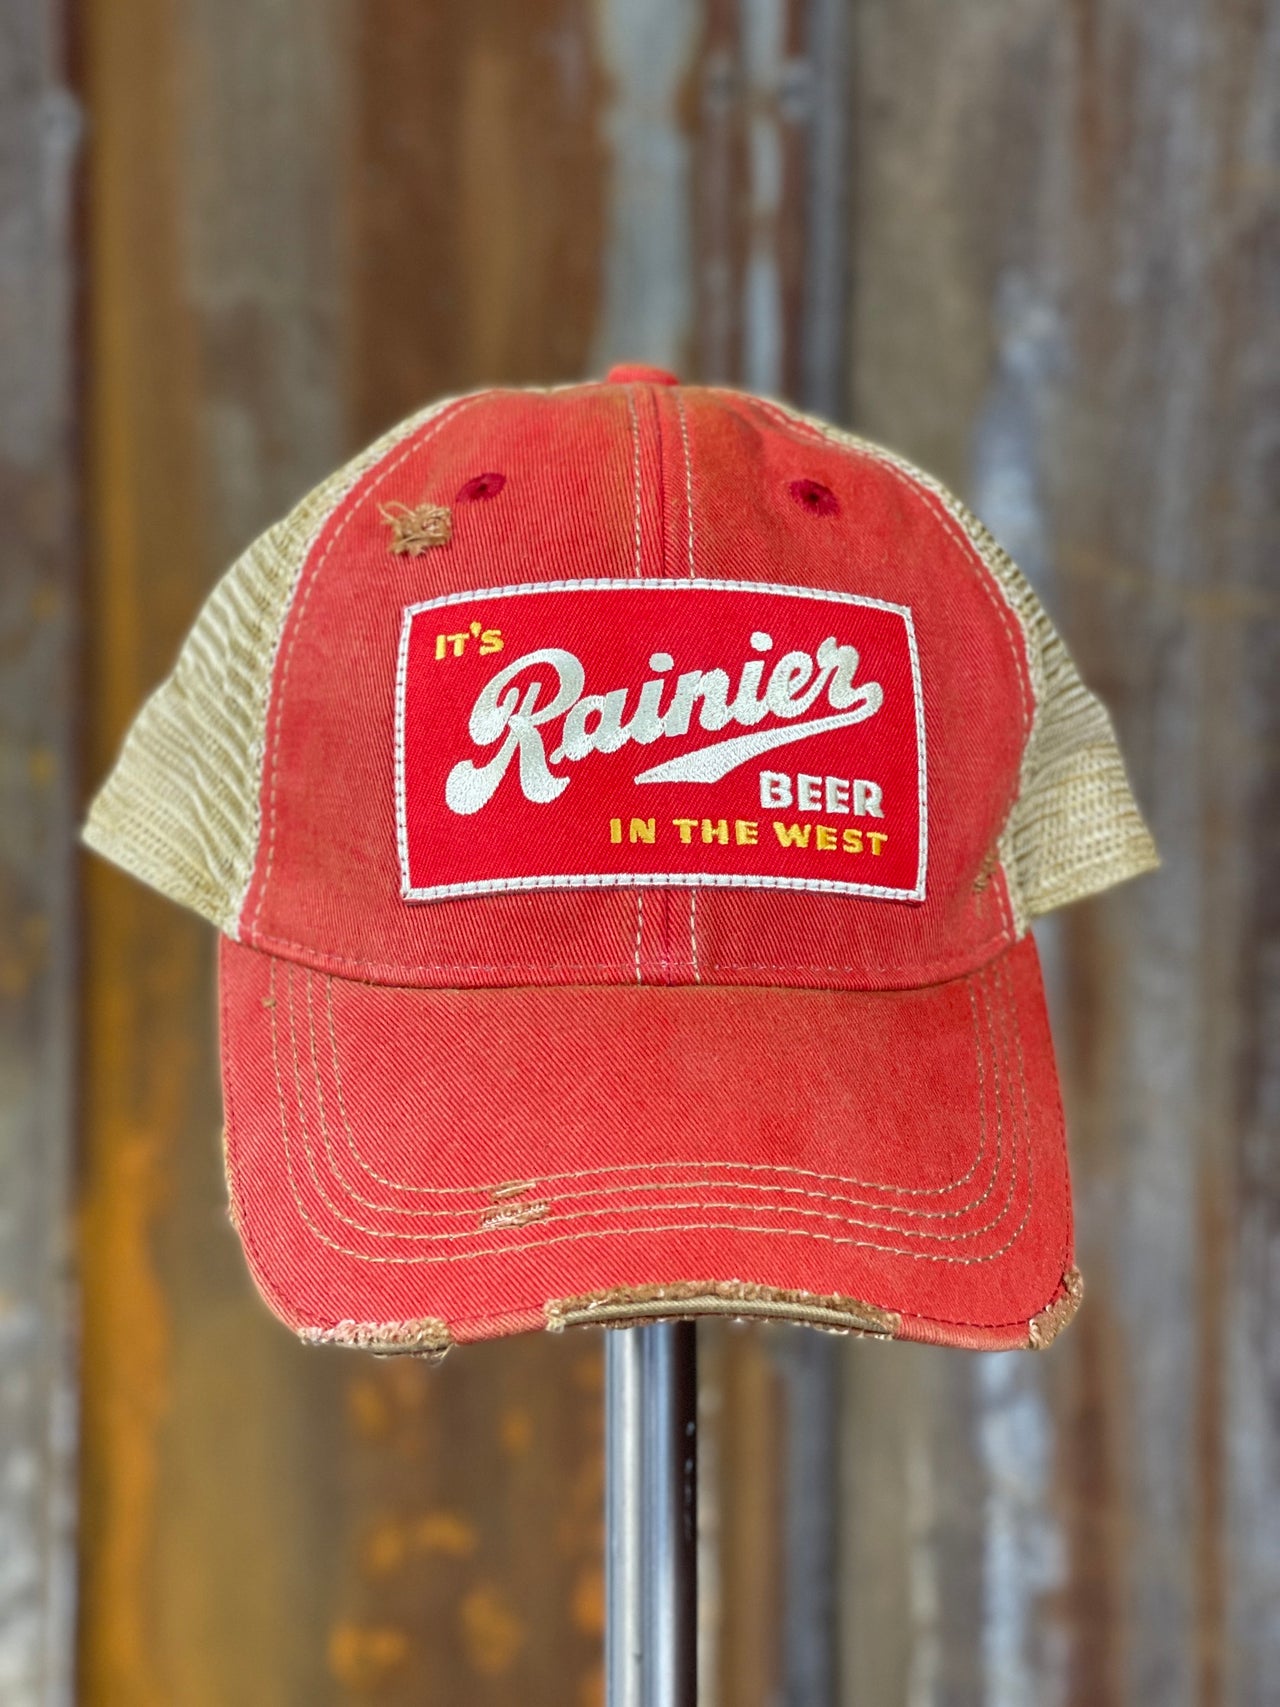 Rainier Beer best The West hat Angry Minnow Vintage